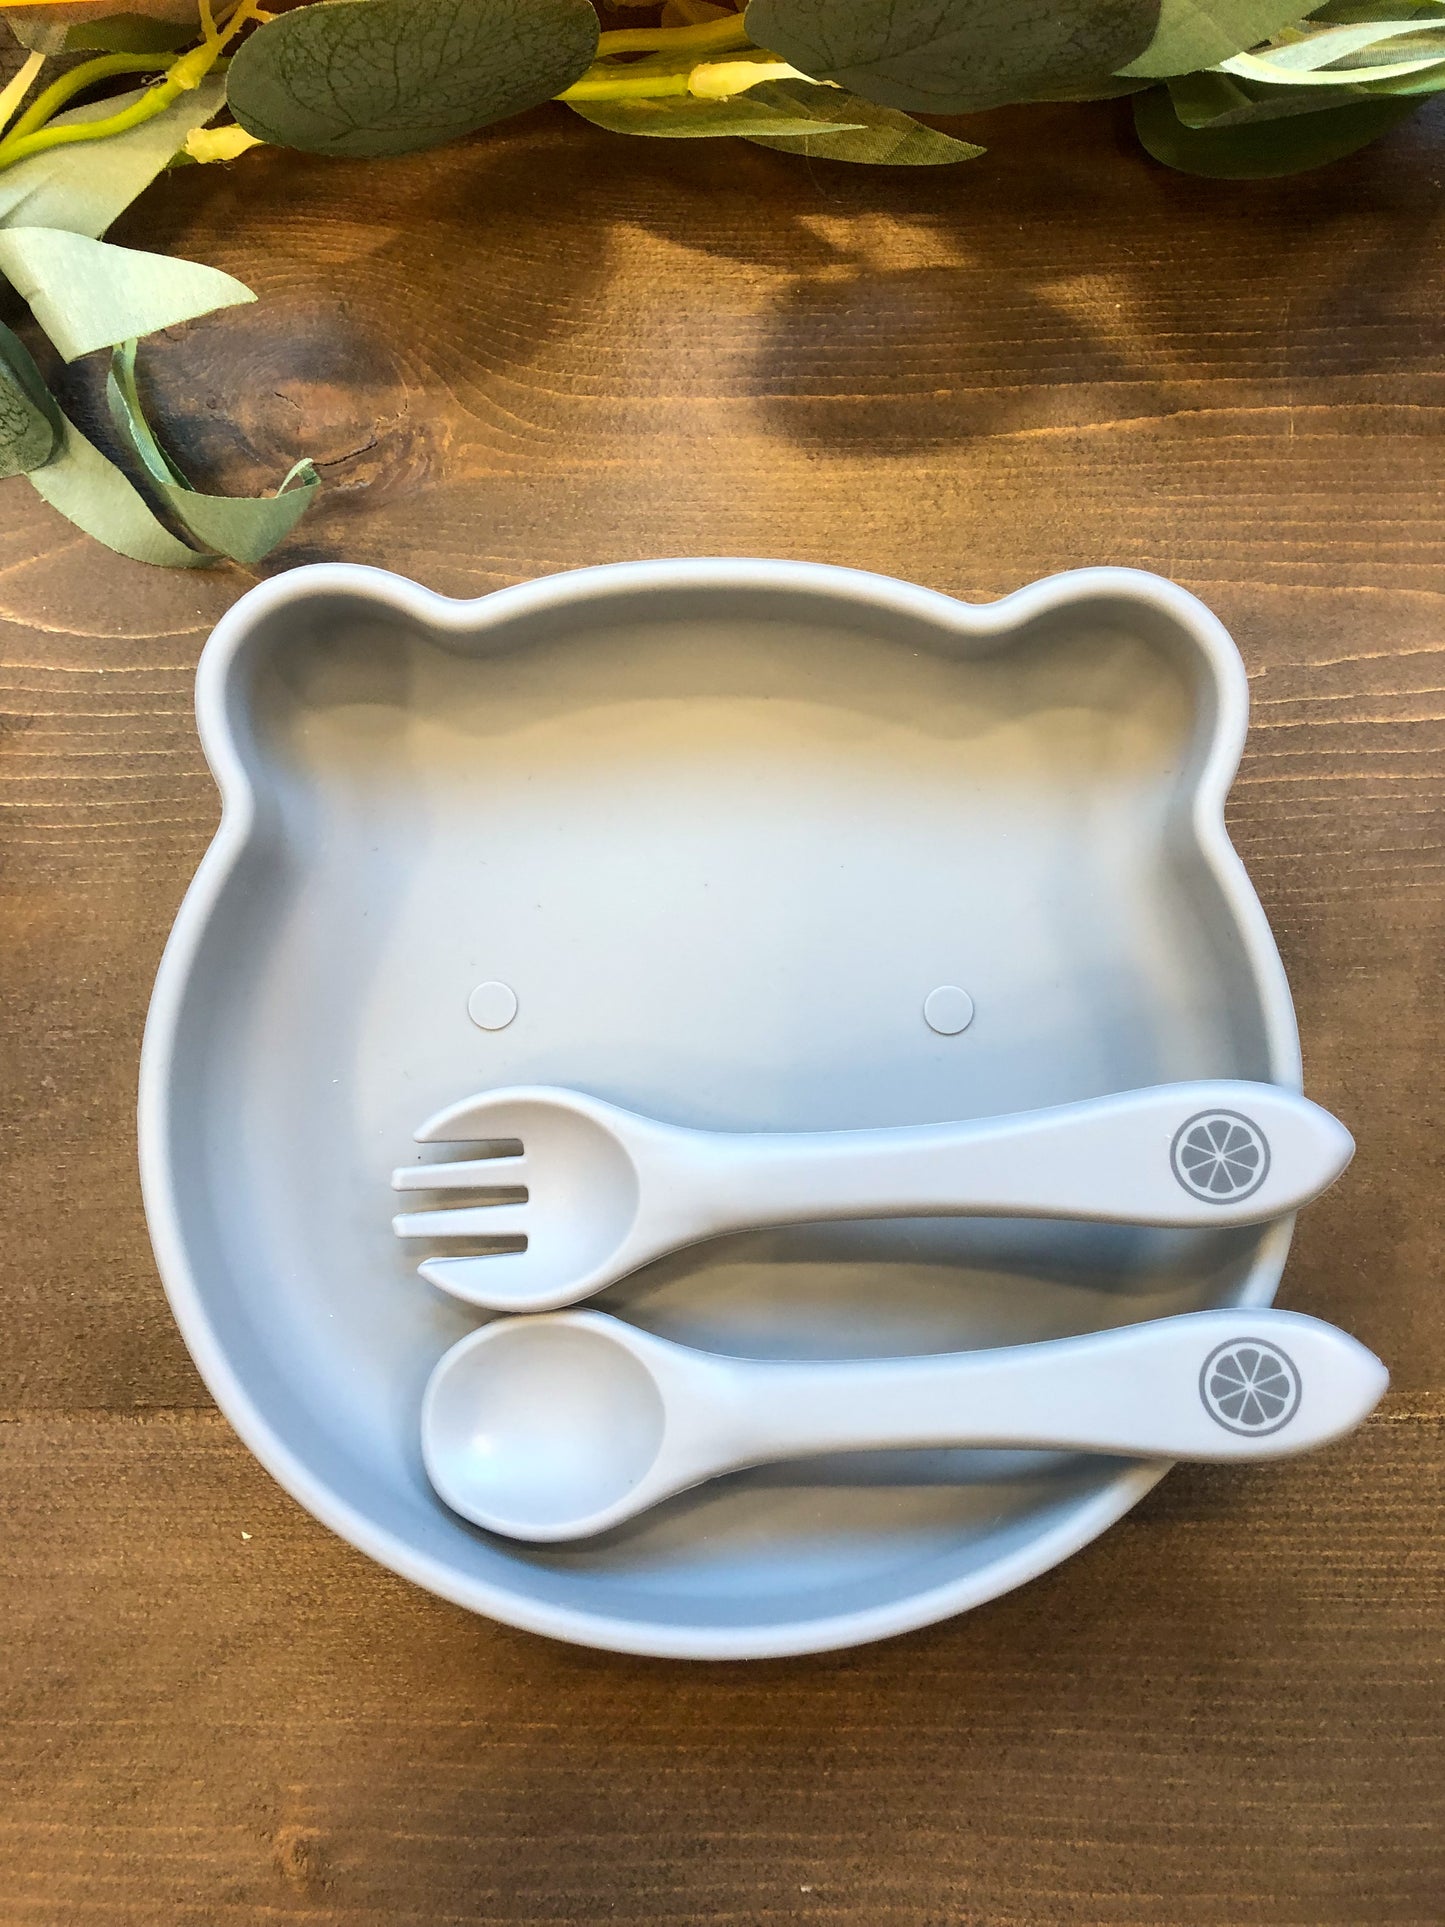 Silicone Spoon and Fork in Stone